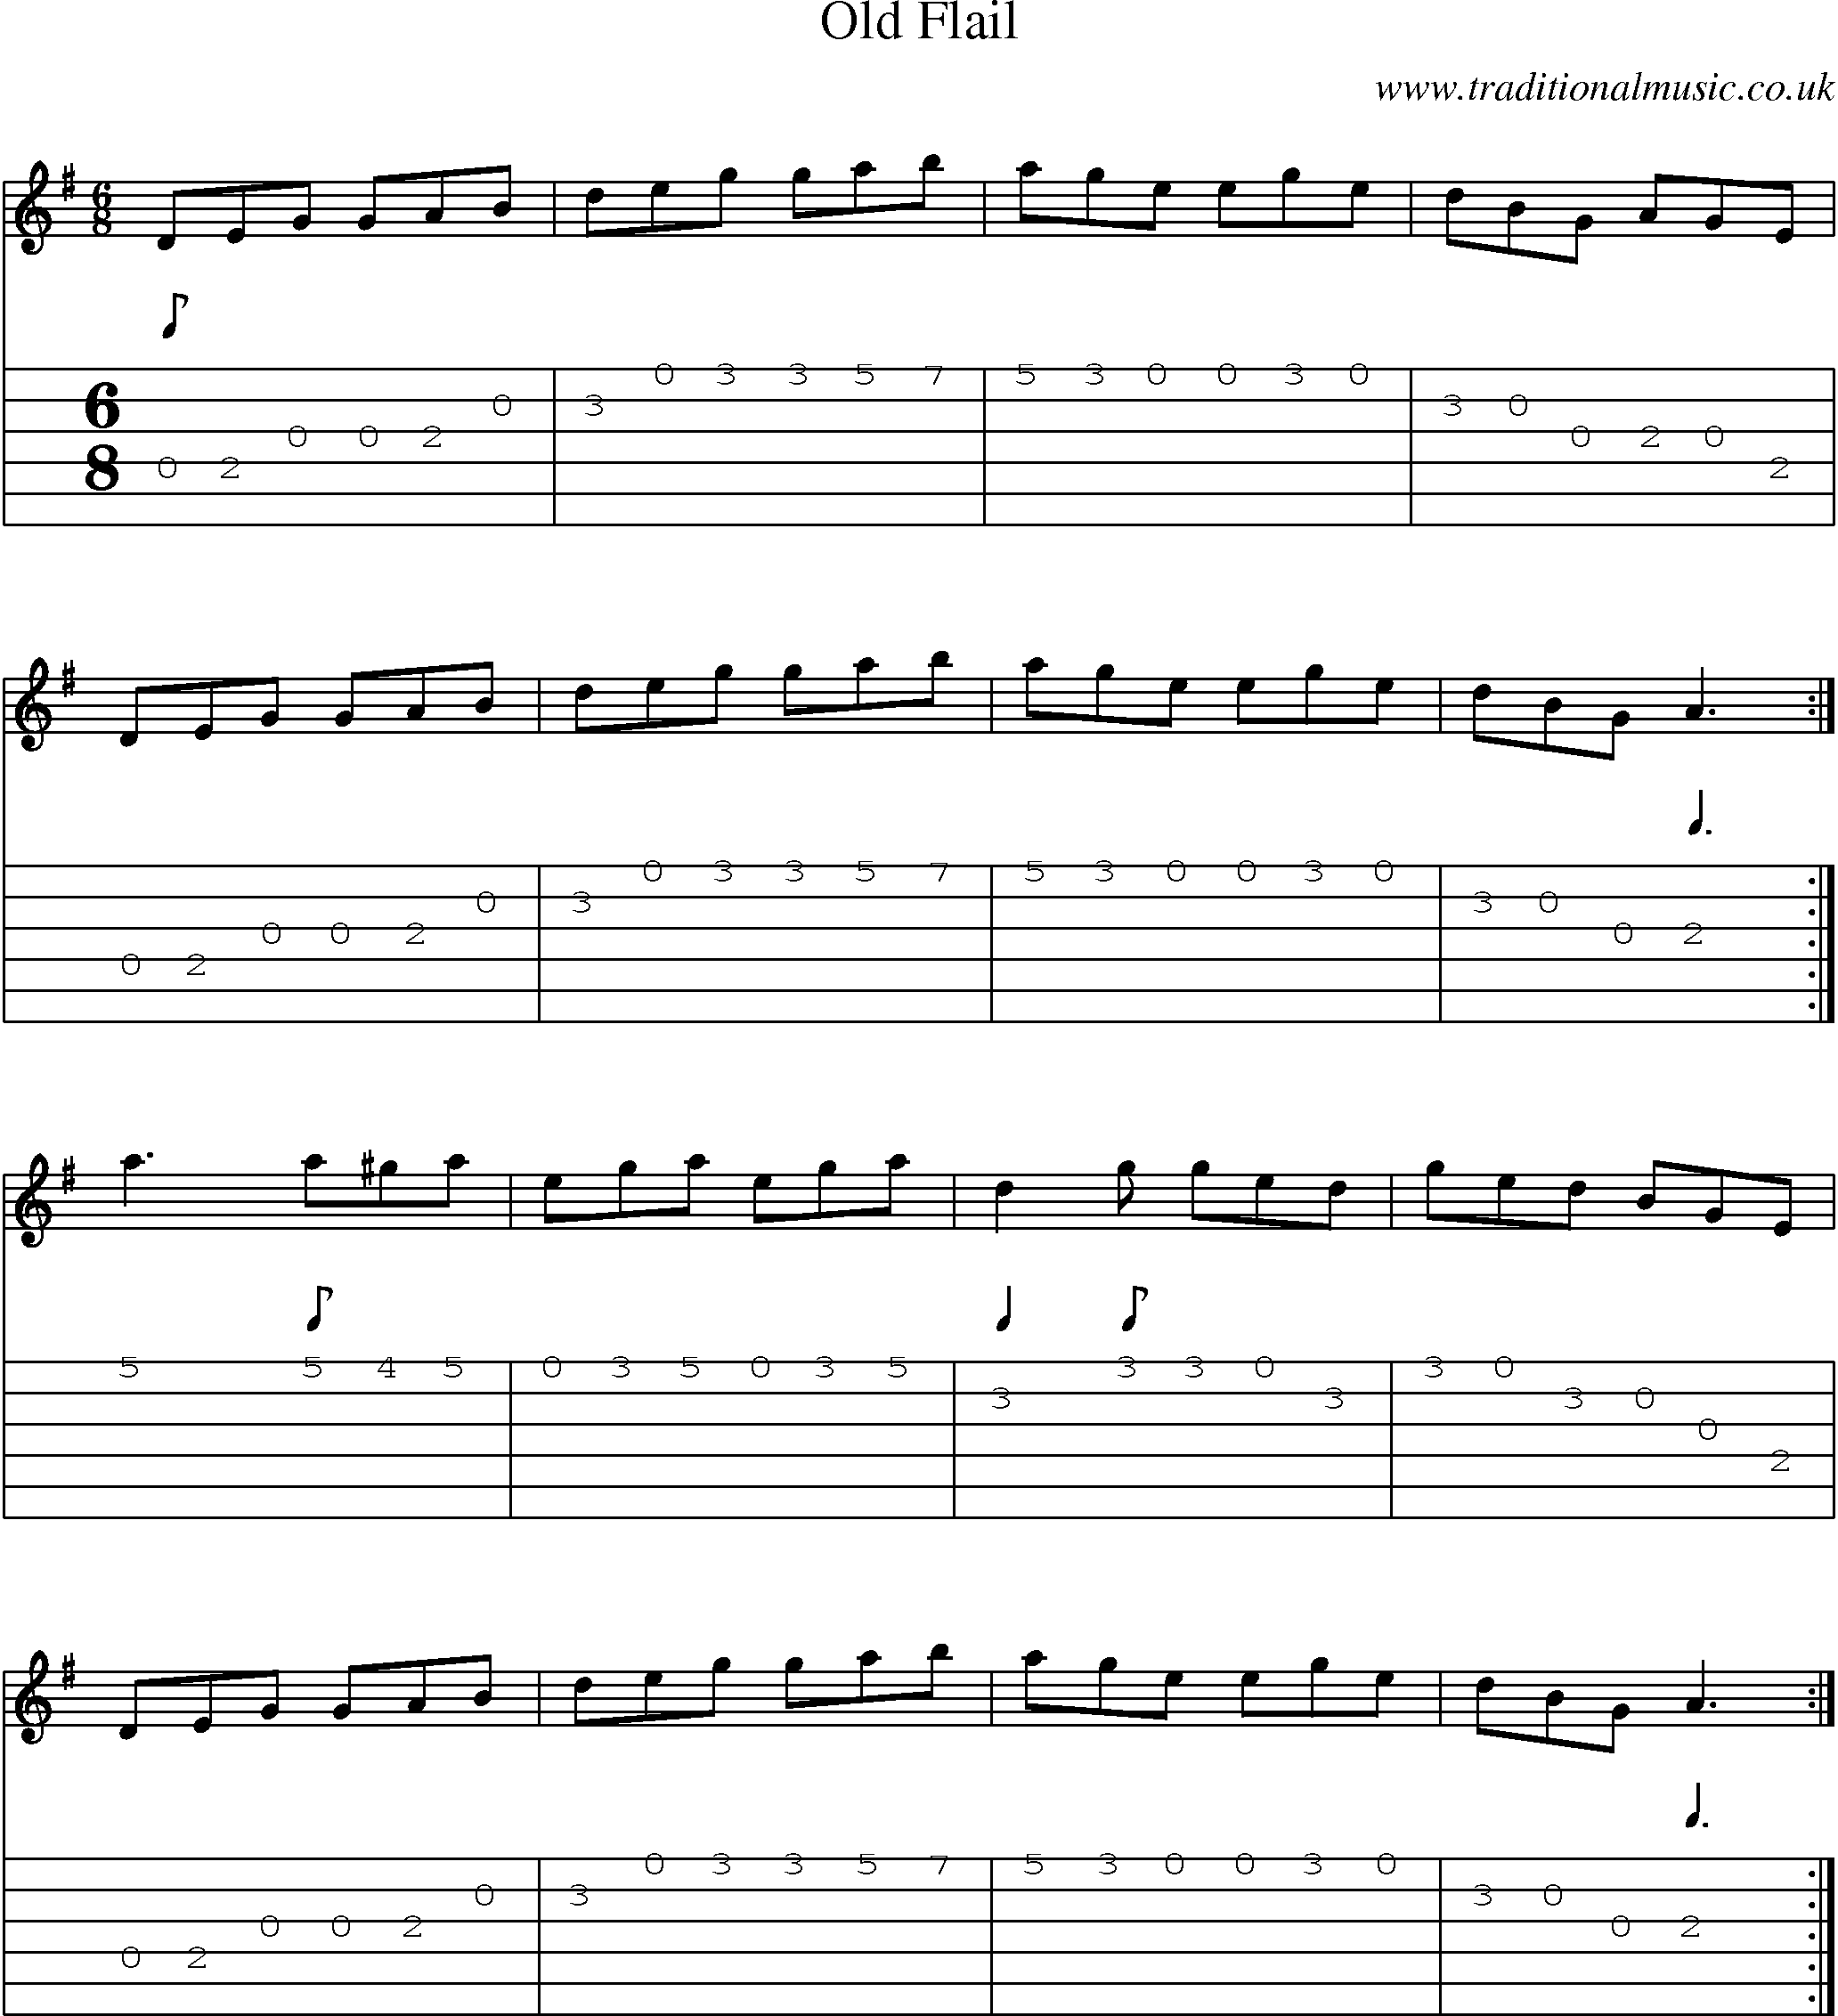 Music Score and Guitar Tabs for Old Flail